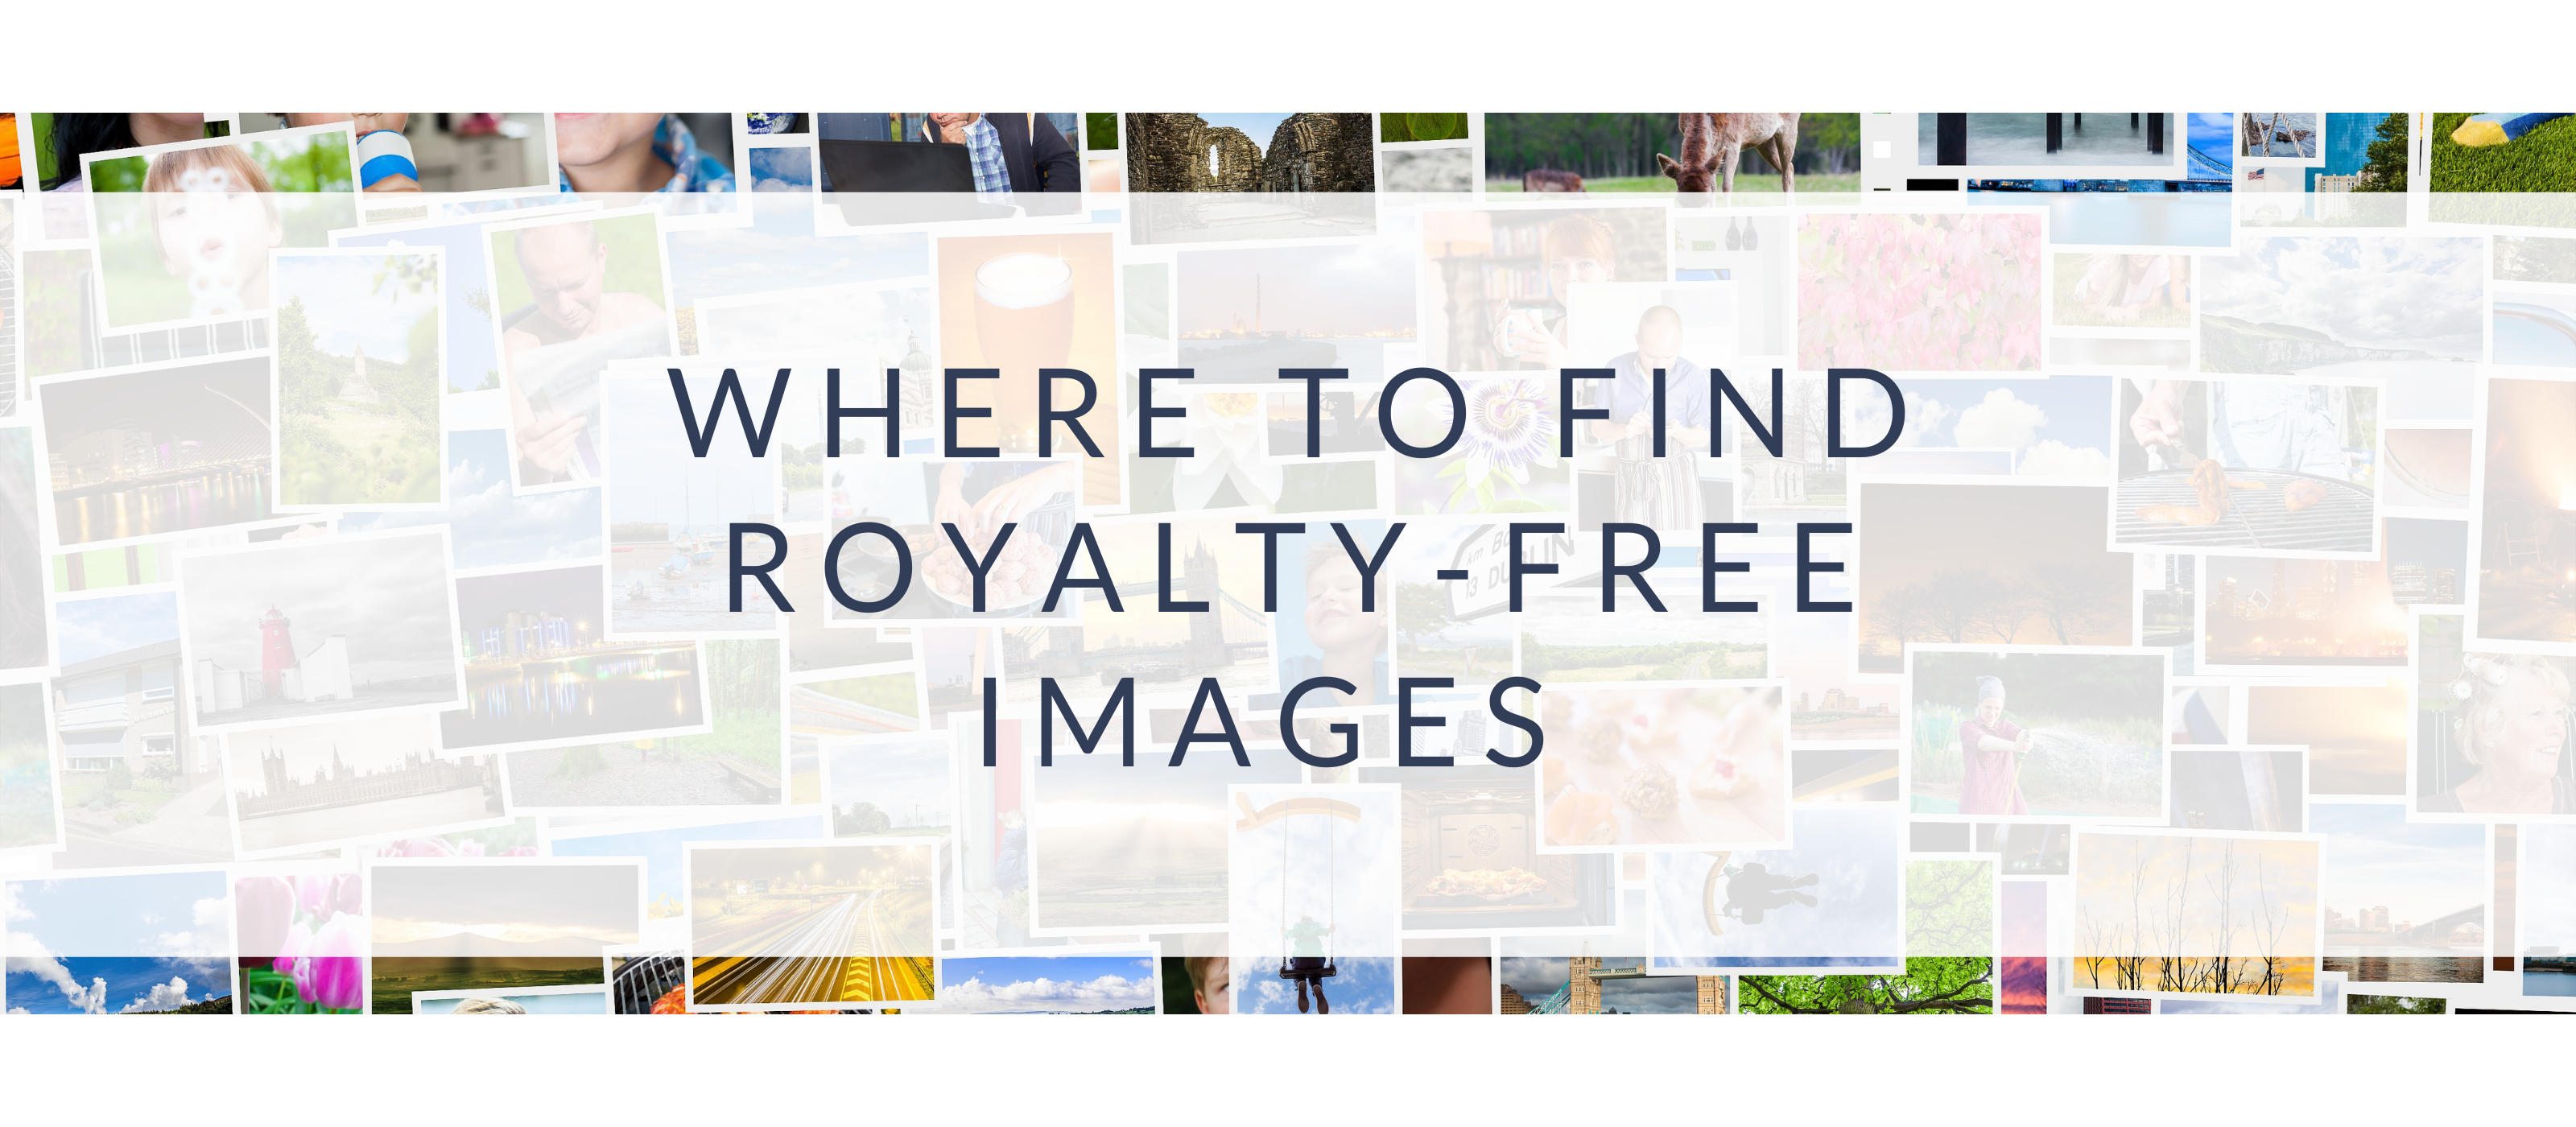 Where to Find High-Quality Royalty-Free Images for Your Designs